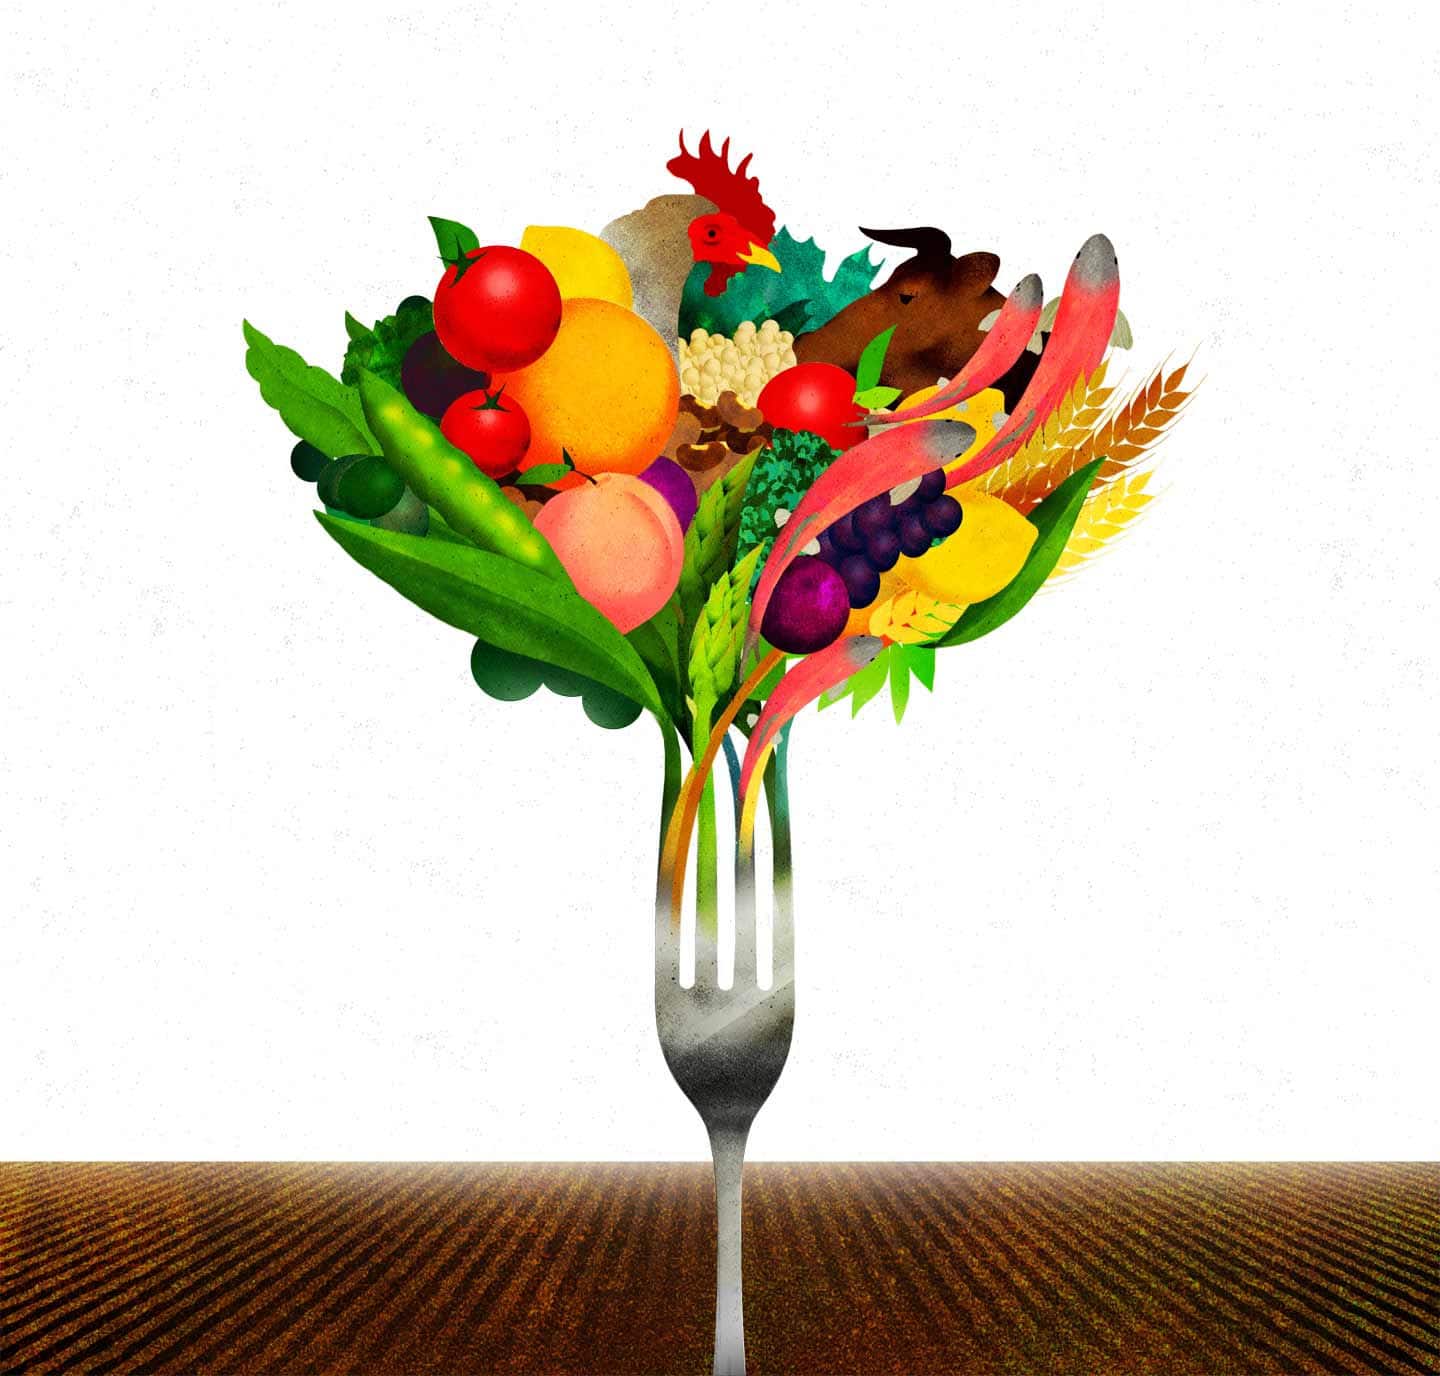 The Future of Food: The Next Generation of GMOs